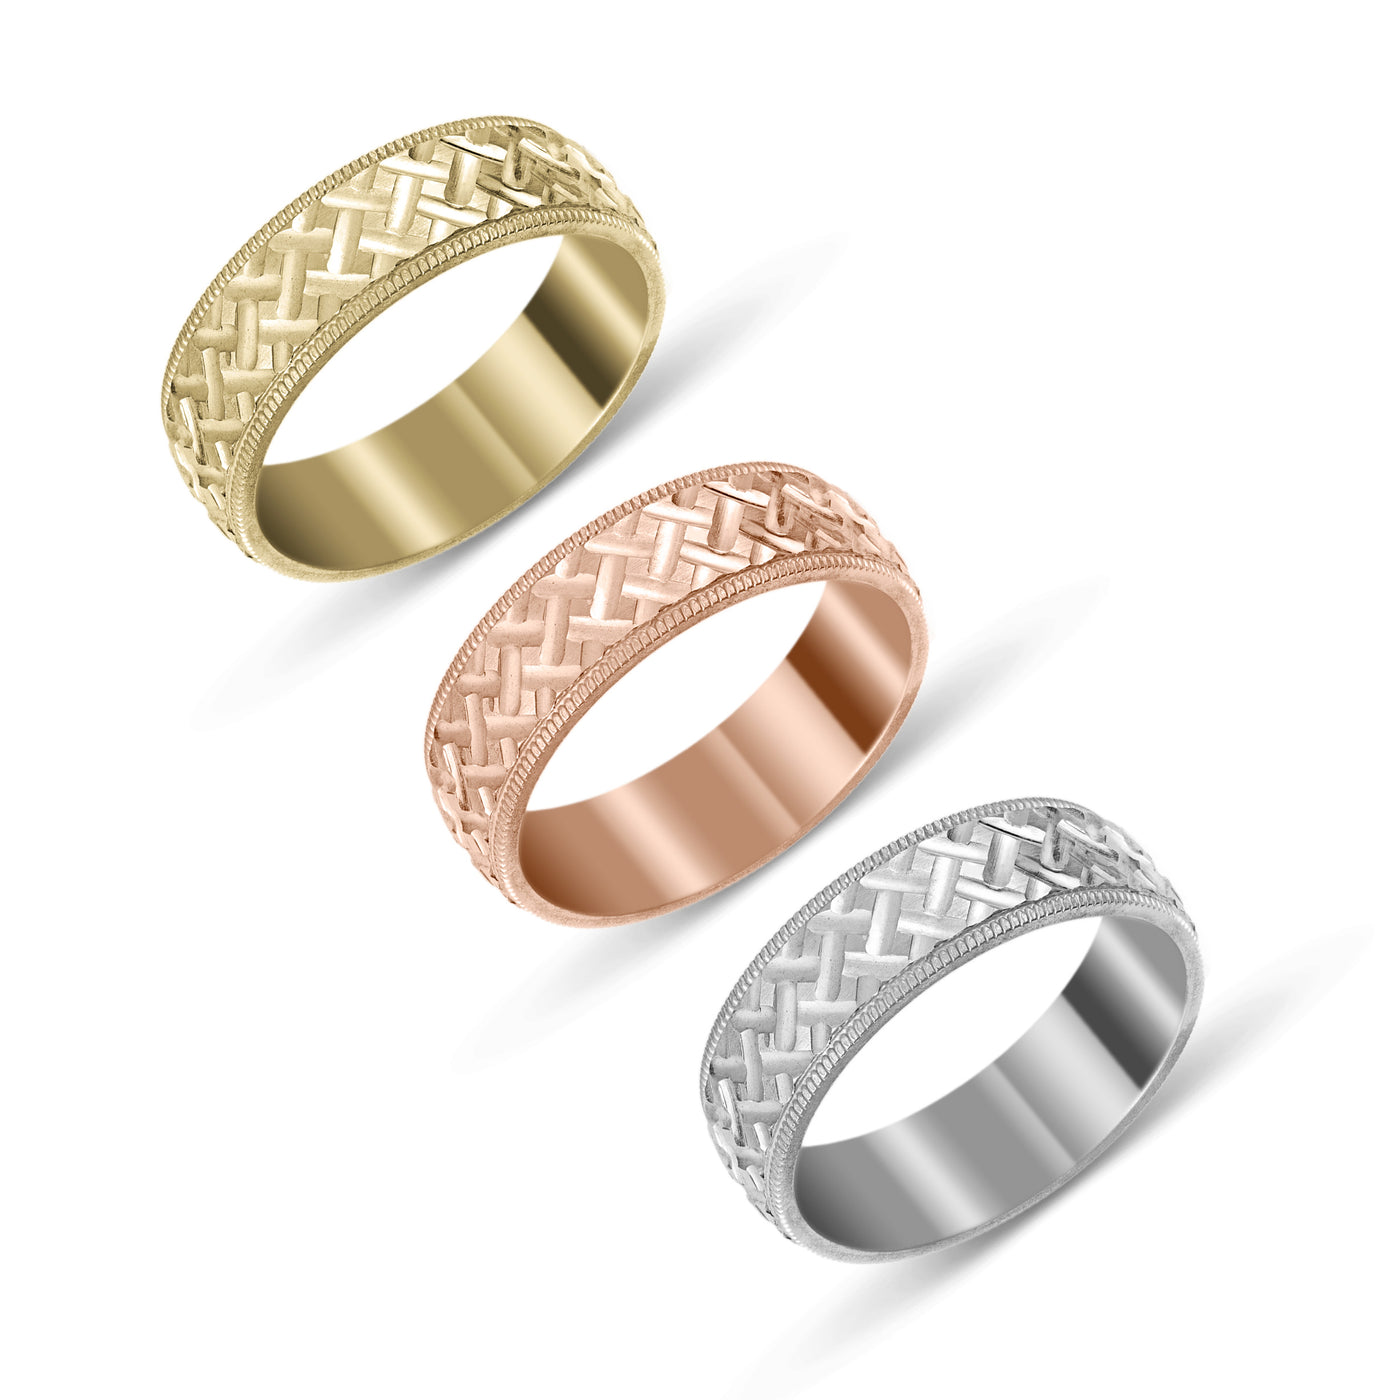 Woven Pattern Comfort Fit Wedding Band Gold - Solid